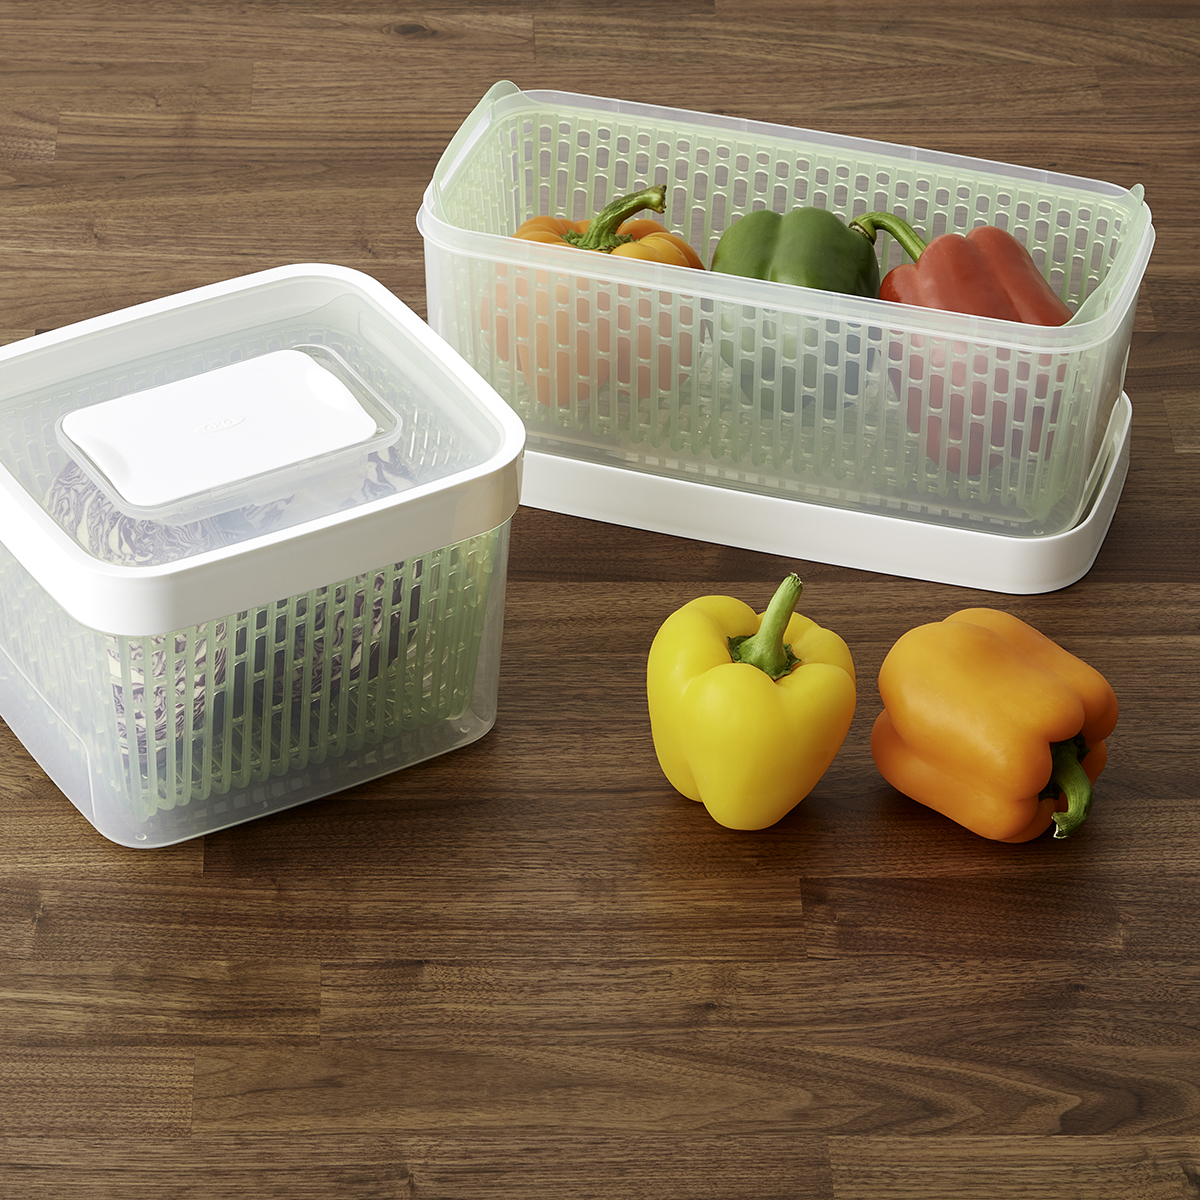 https://www.containerstore.com/catalogimages/376121/KH_19-10066186-OXO-Container_RGB.jpg